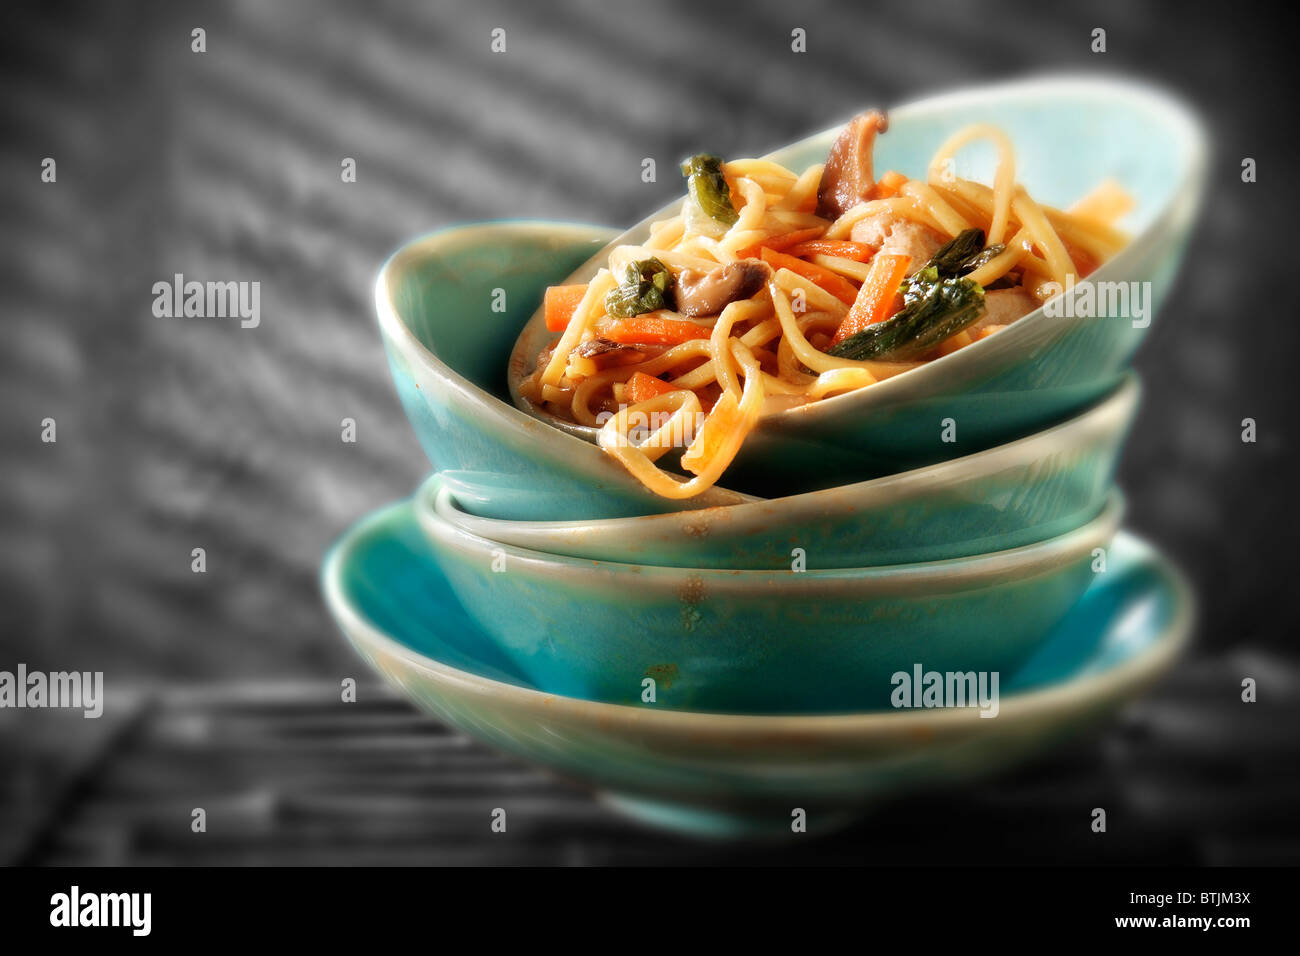 Chinese Stir fried vegetables & noodles Stock Photo